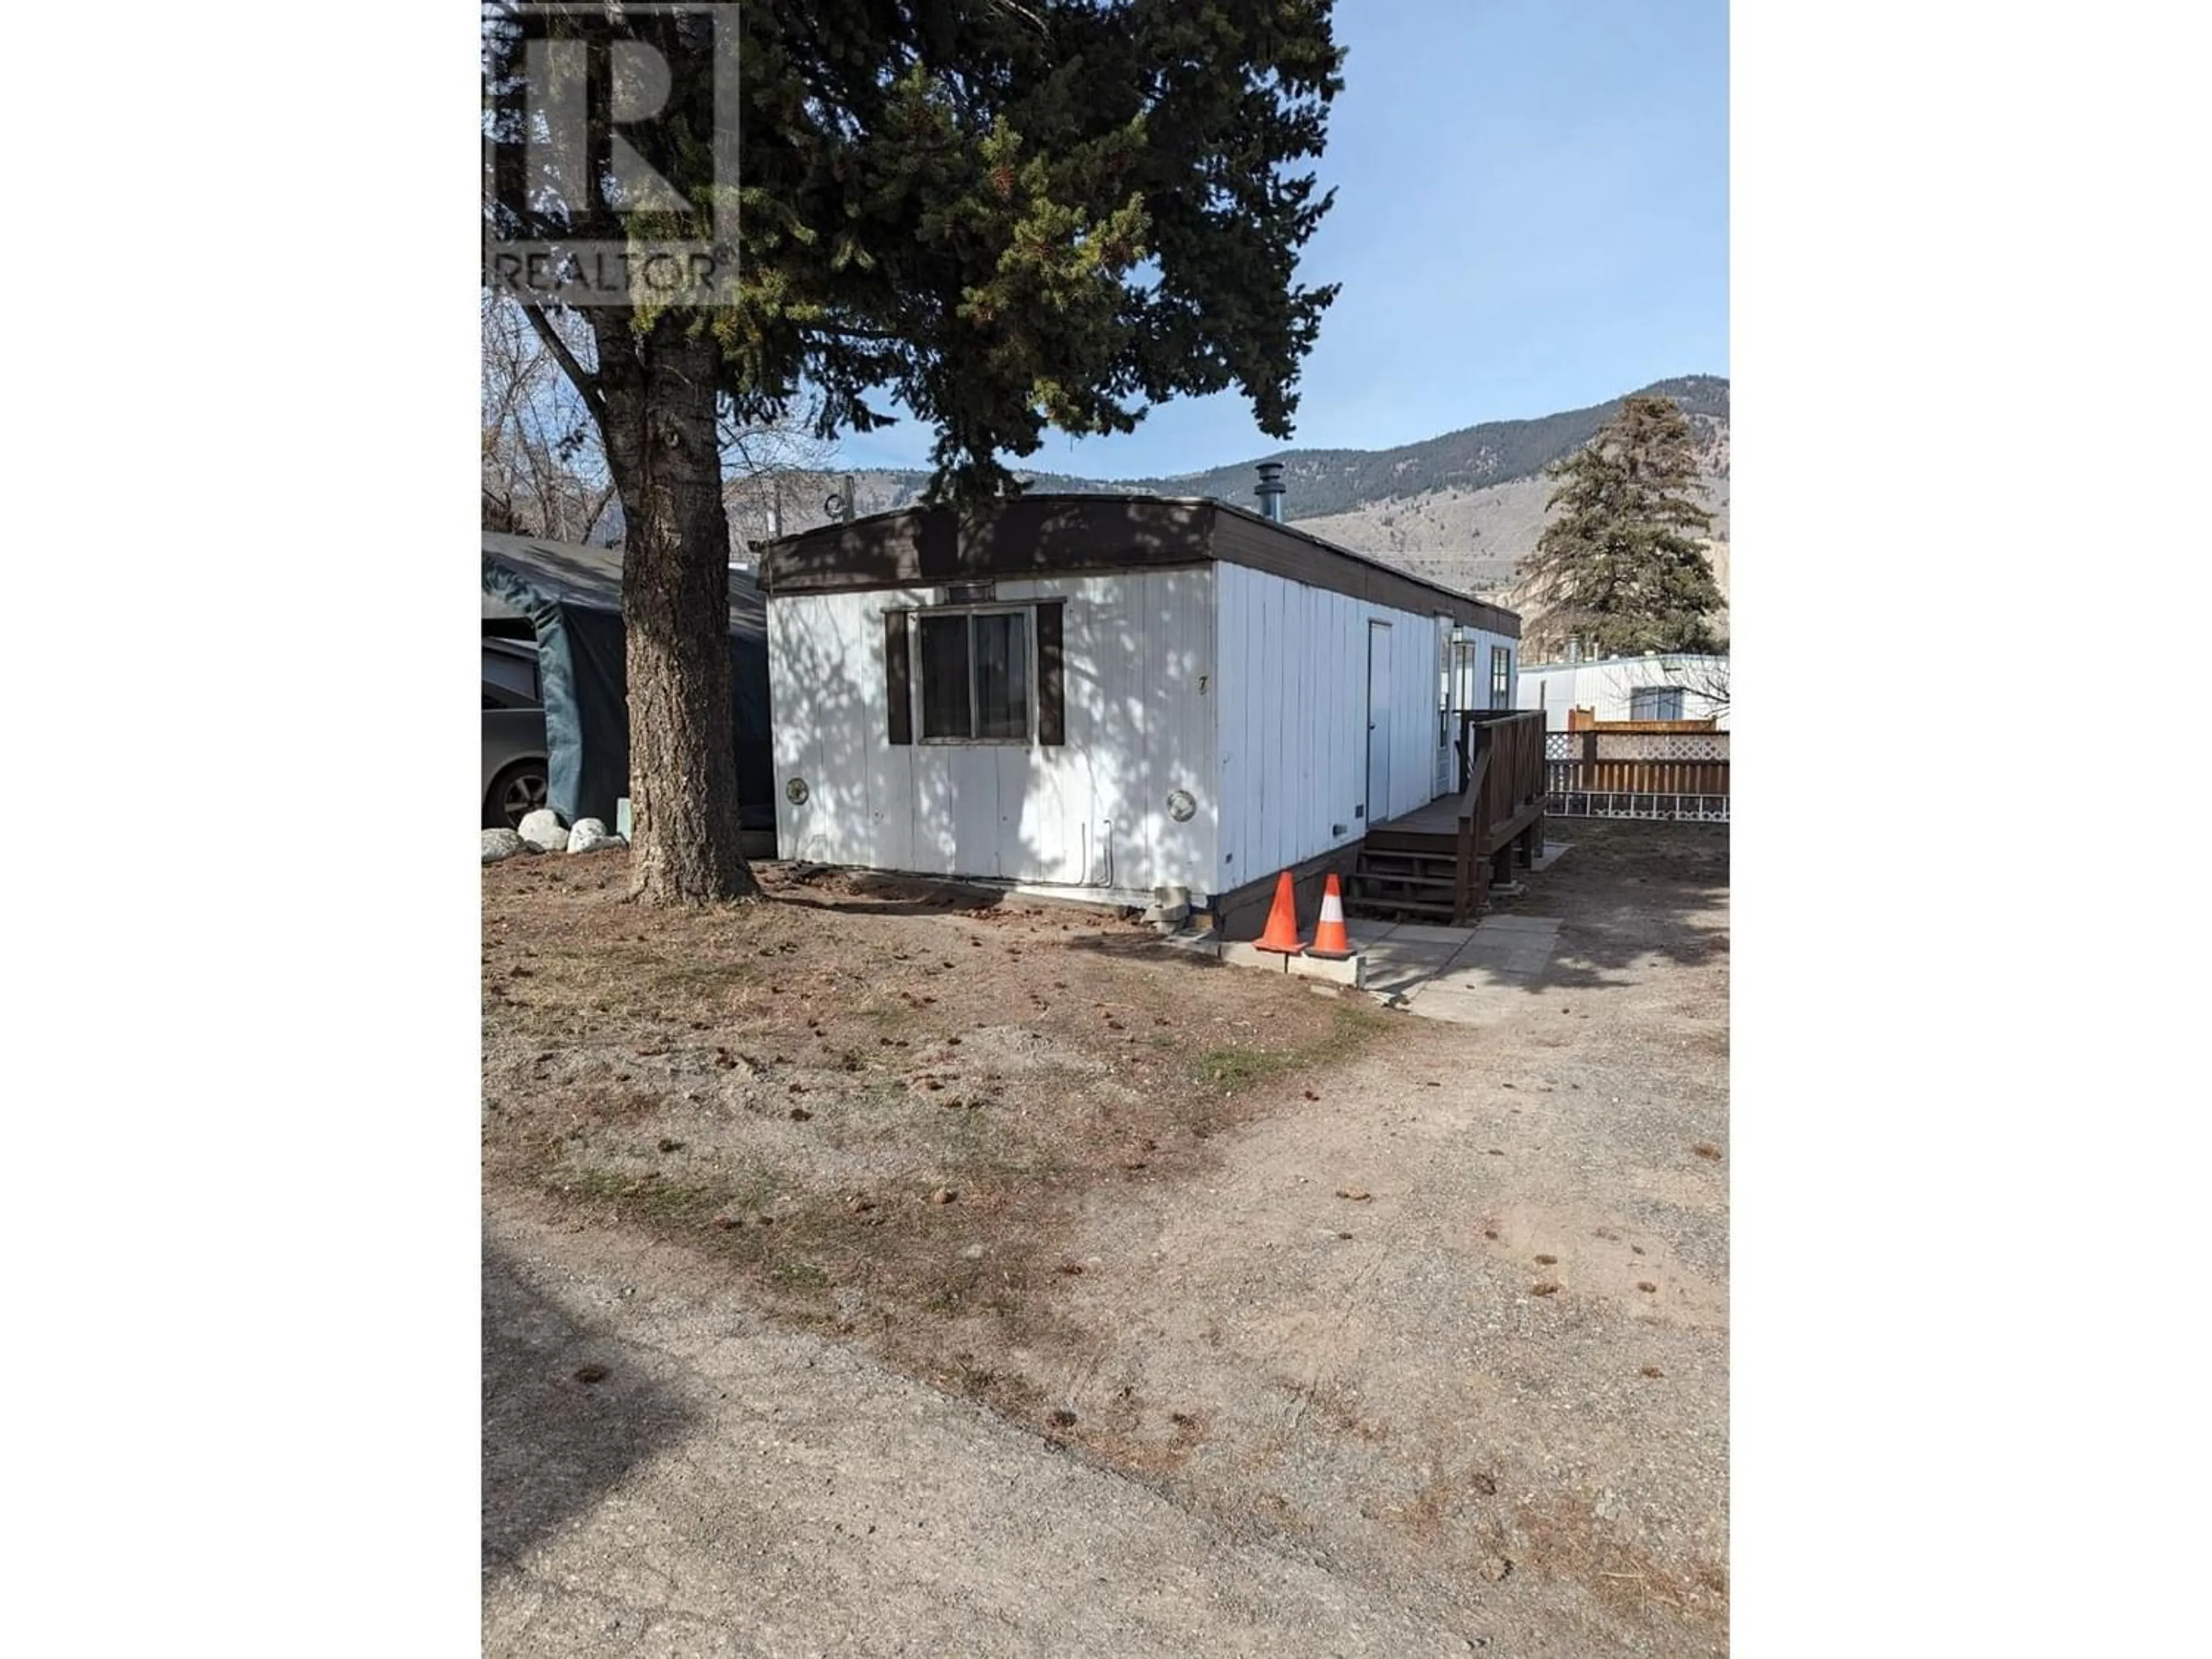 Shed for 7-4395 TRANS CANADA HWY, Kamloops British Columbia V2C4S4